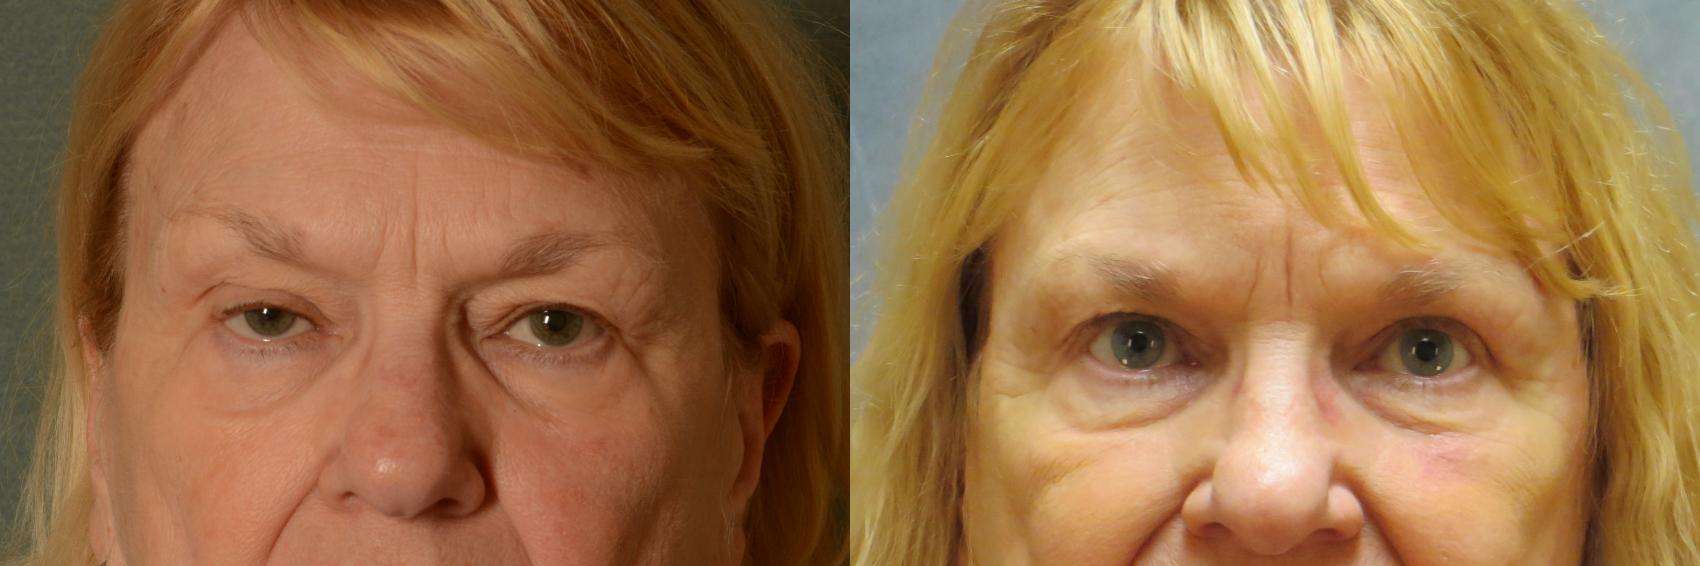 Before & After Eyelid Surgery (Blepharoplasty) Case 463 Front View in Tallahassee, FL